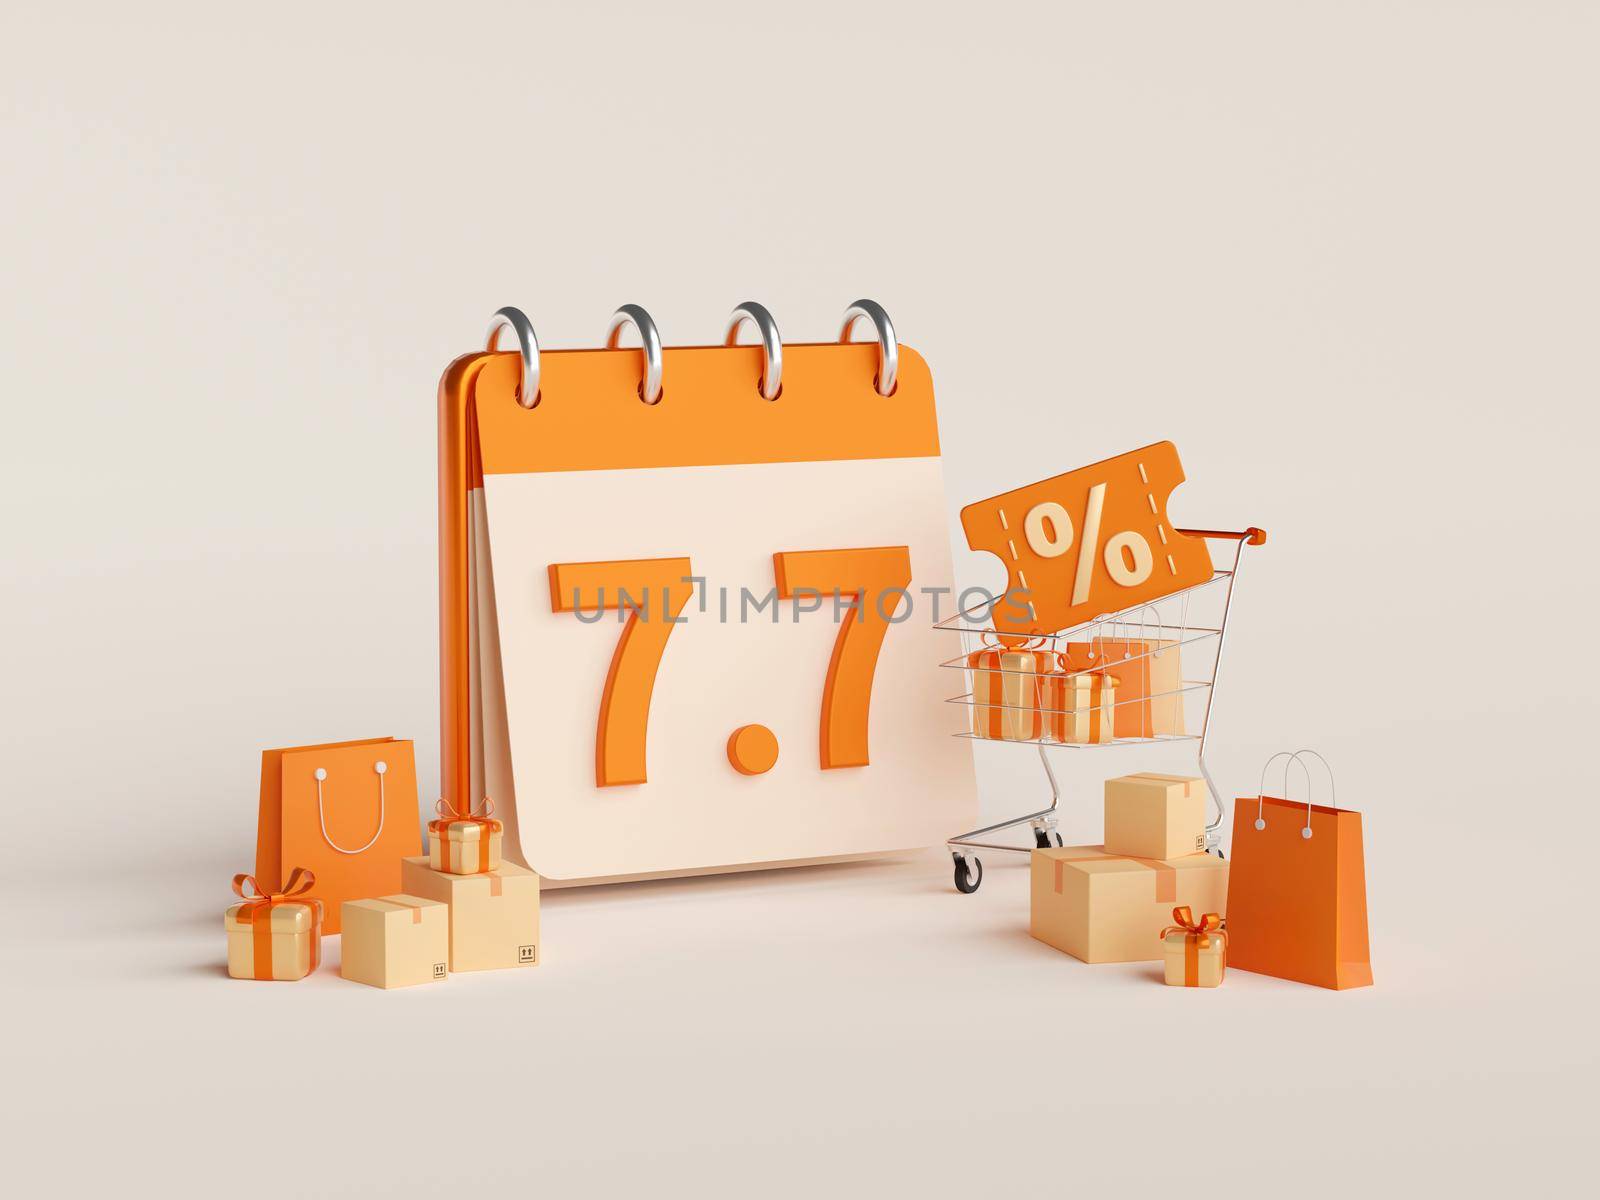 3d illustration of Promotion deal 7.7 with discount price for shopping by nutzchotwarut